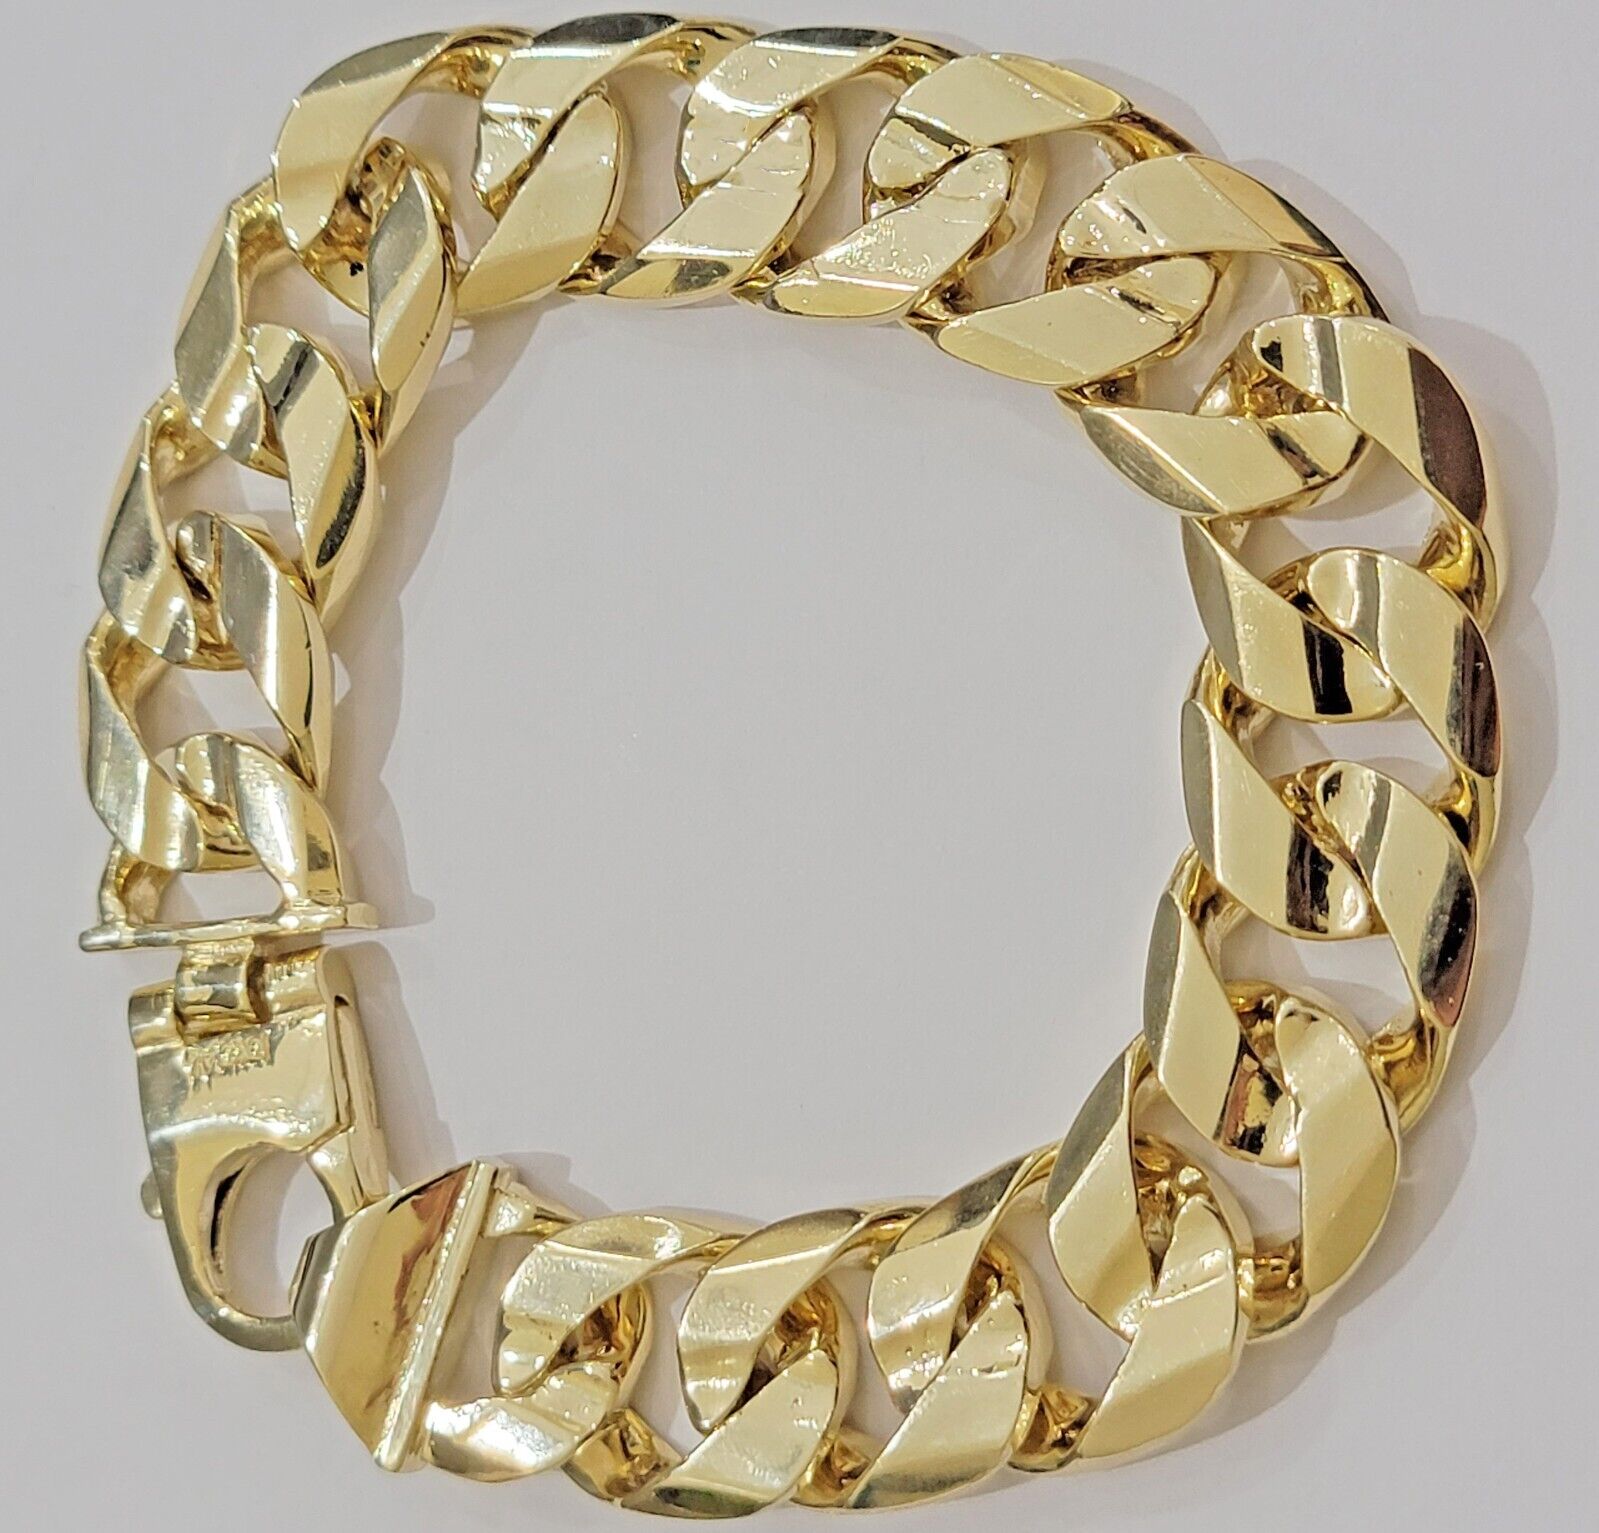 10k Bracelet Miami Cuban Curb Link Mariner Anchor 20mm SOLID 10K Yellow Gold 9